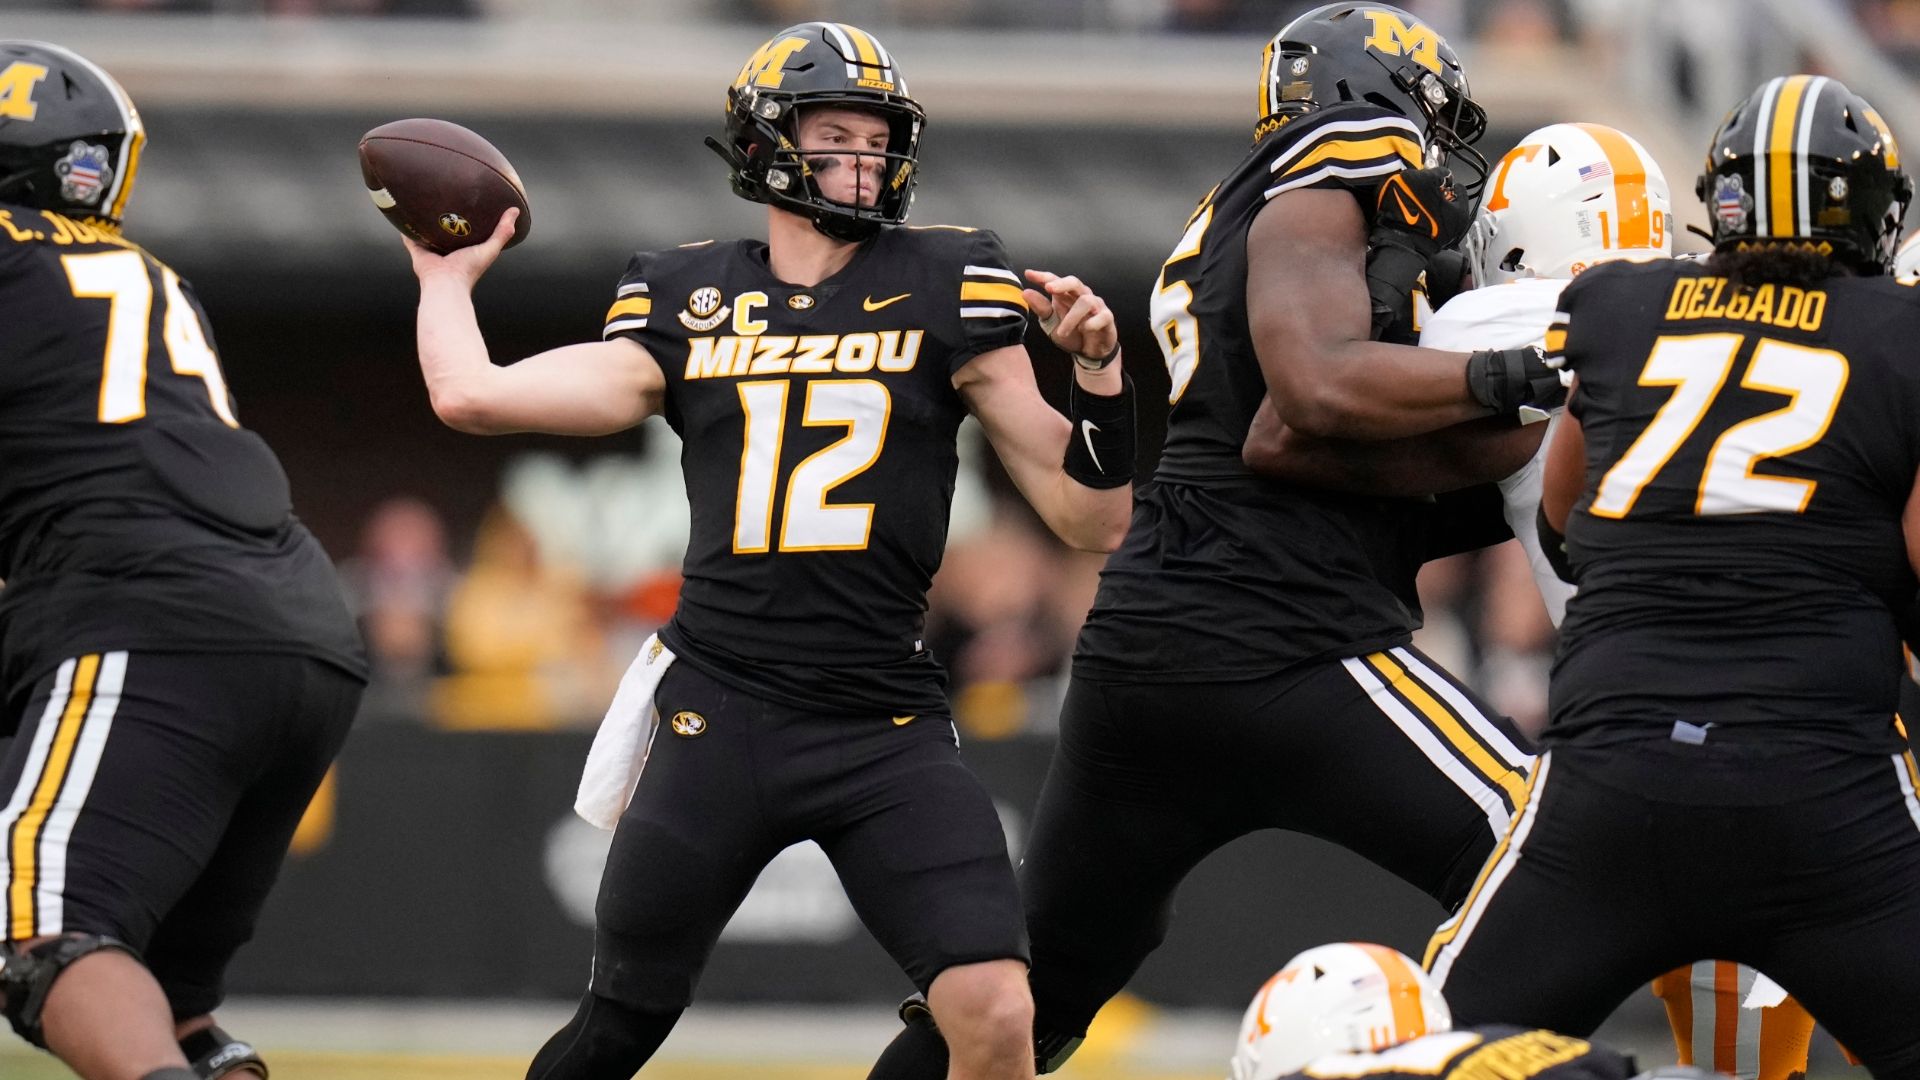 Mizzou QB Cook's new tactics create accelerated results